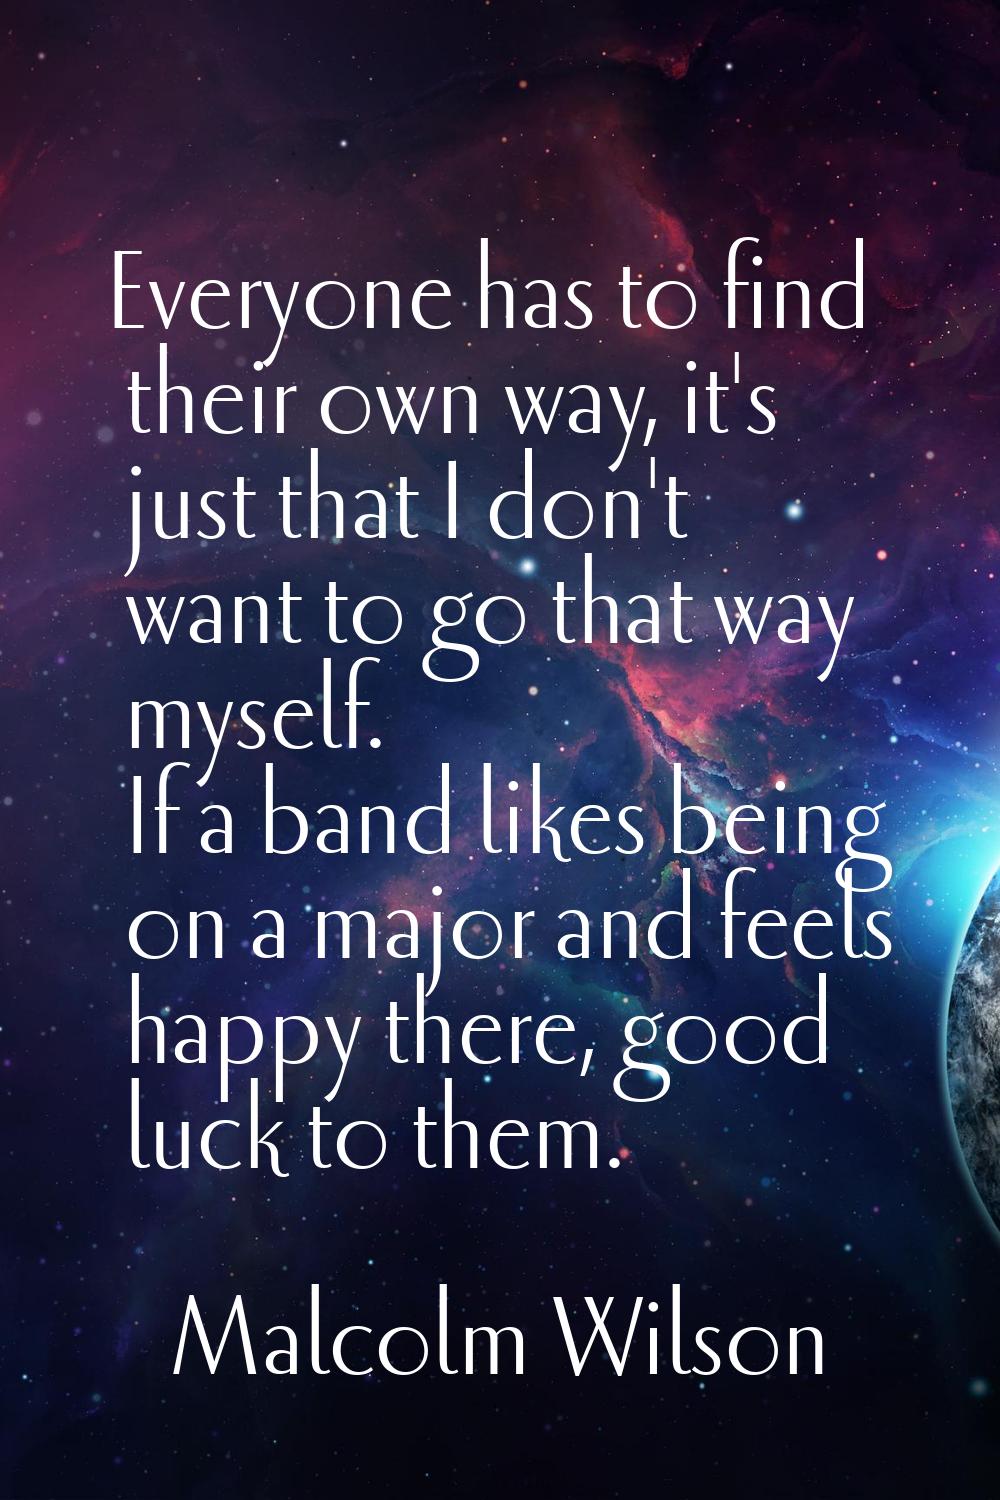 Everyone has to find their own way, it's just that I don't want to go that way myself. If a band li